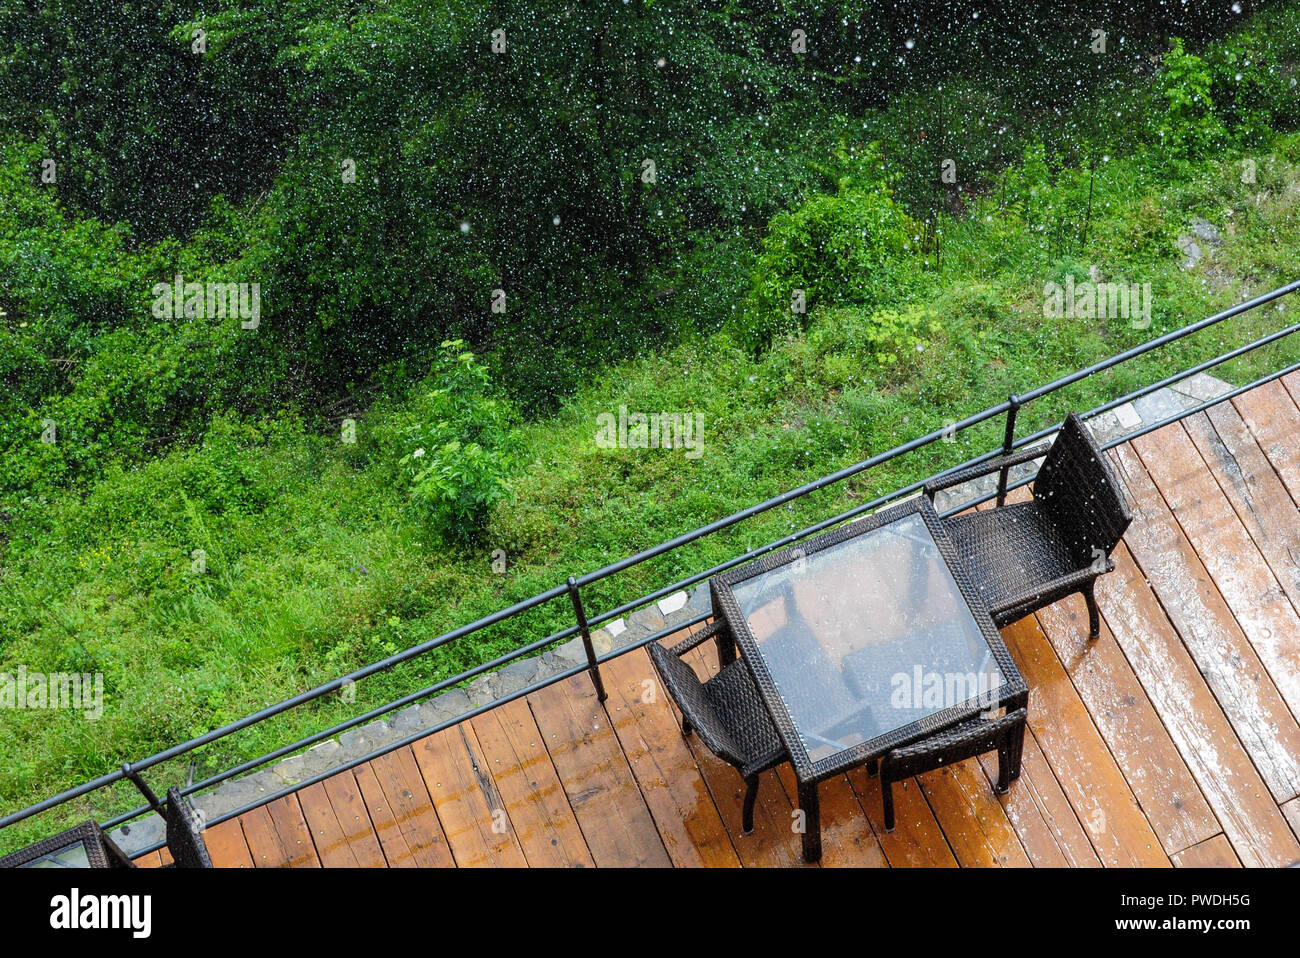 A top view of an outdoor table and chairs in the rain Stock Photo